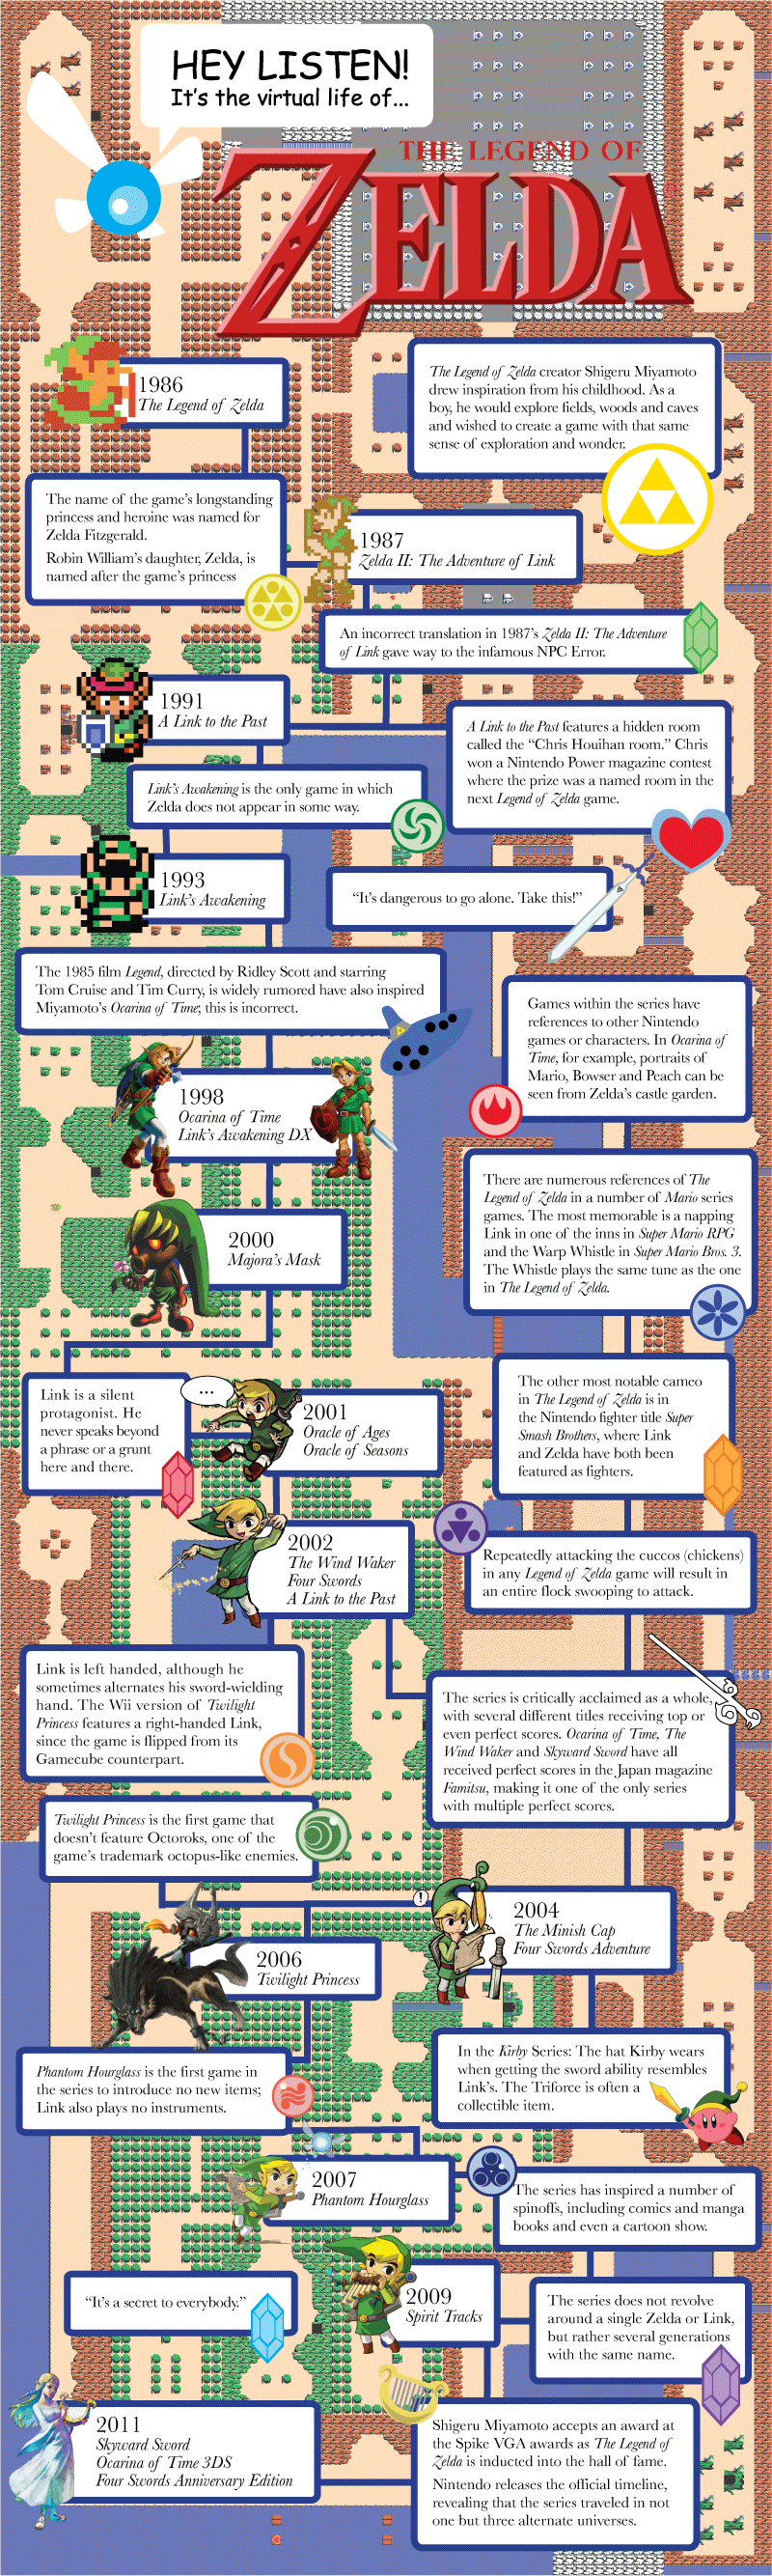 Infographic - 16 Facts About Nintendo's The Legend of Zelda